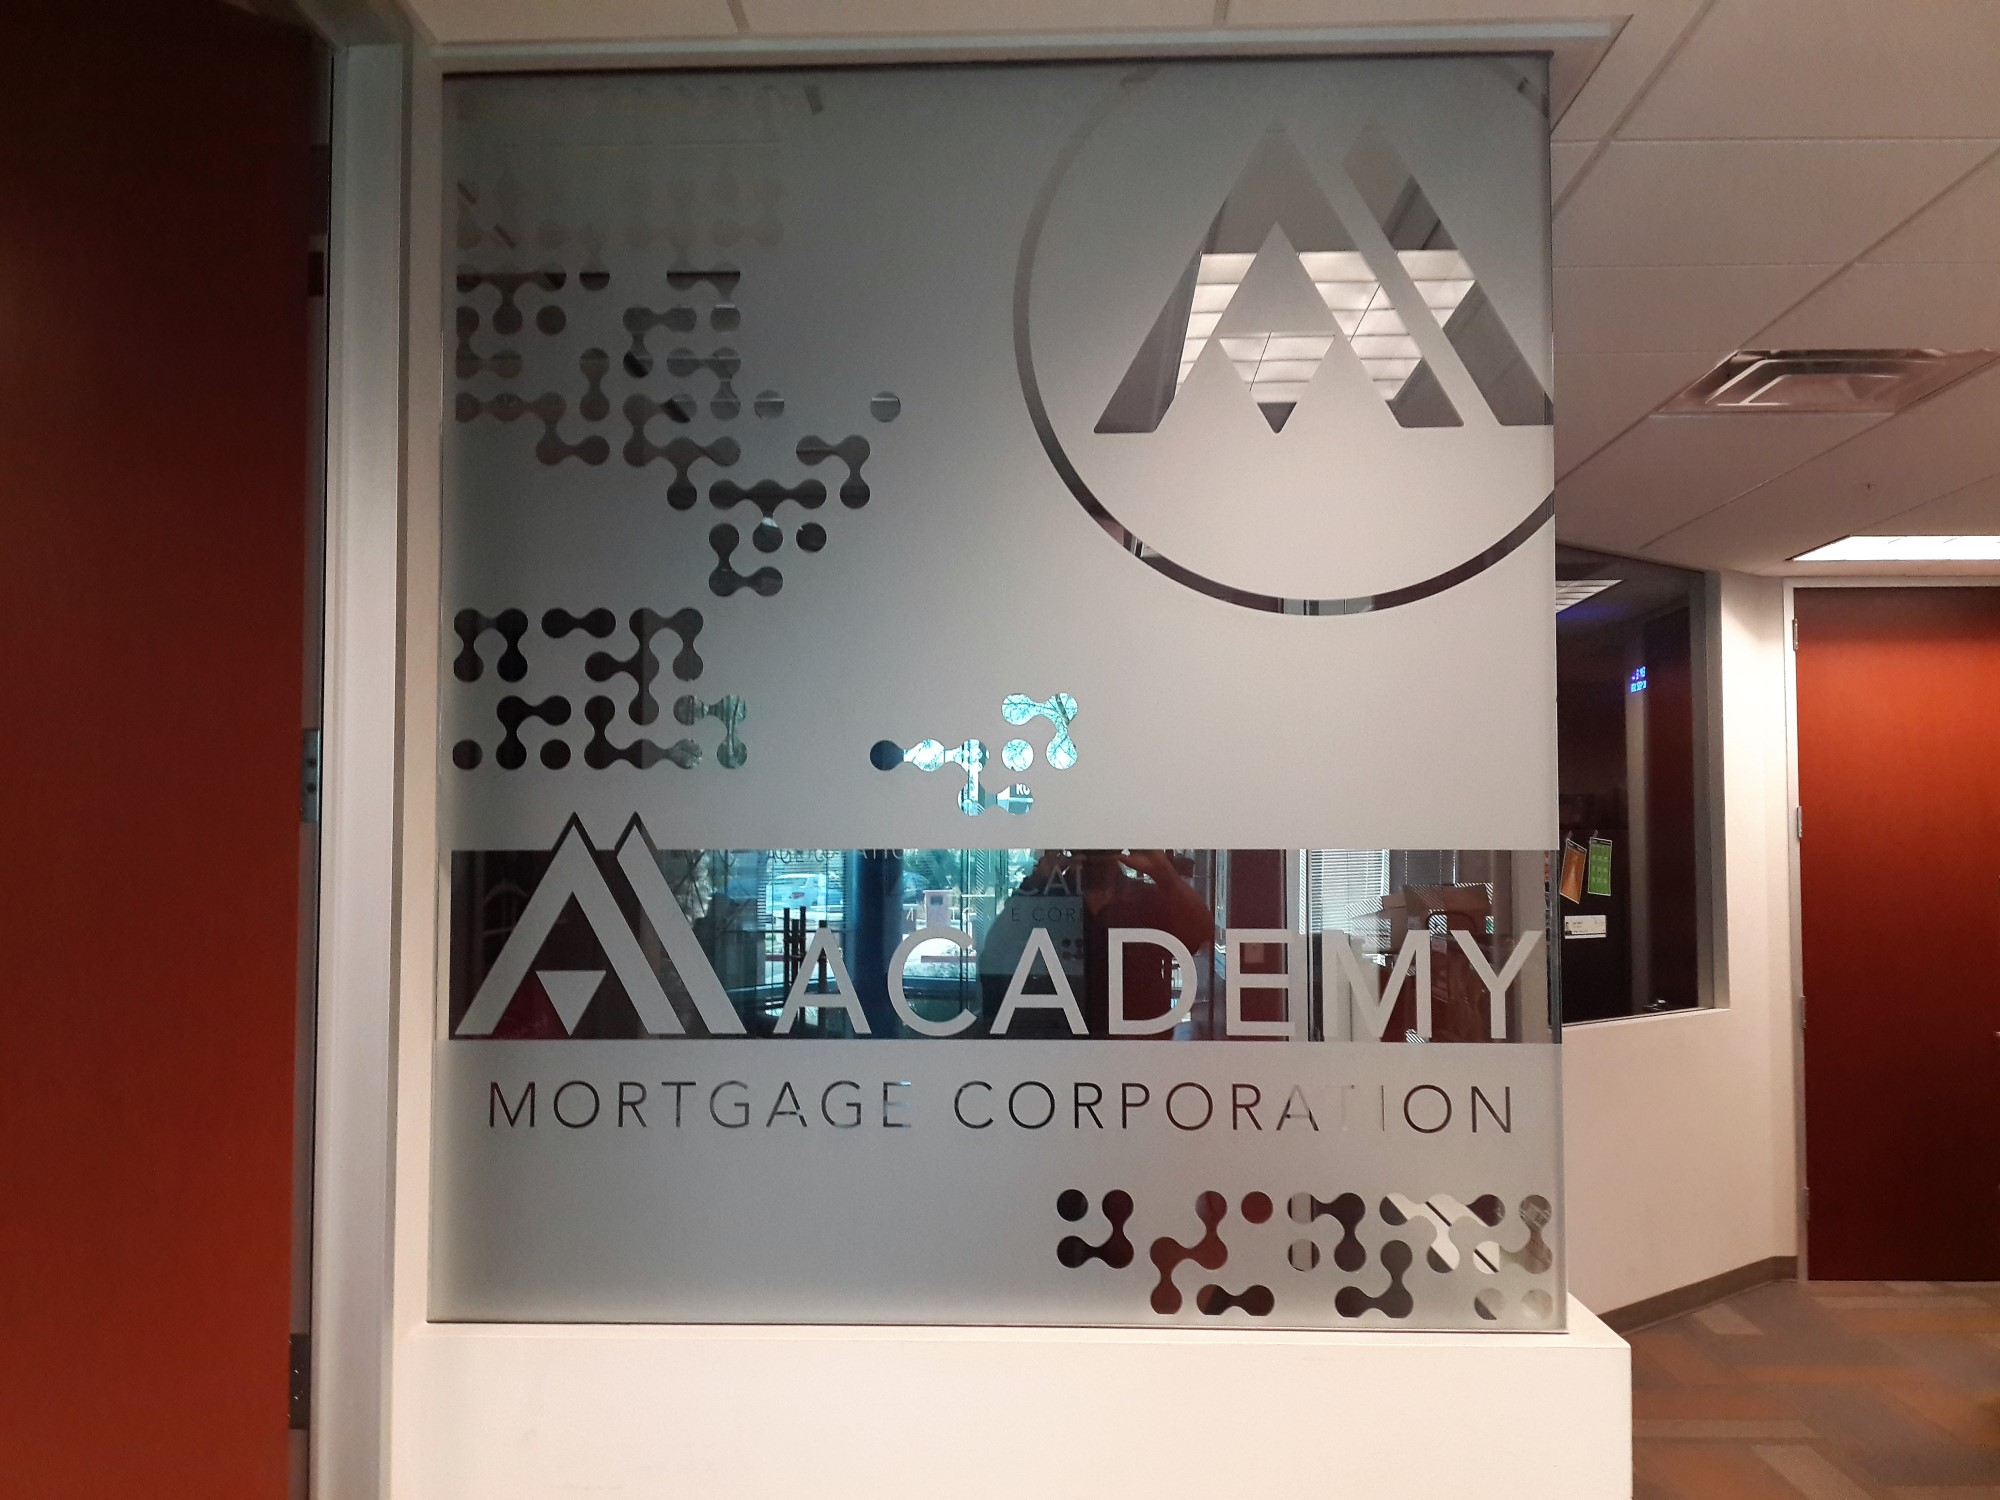 Academy Mortgage Corporation frosted window graphic